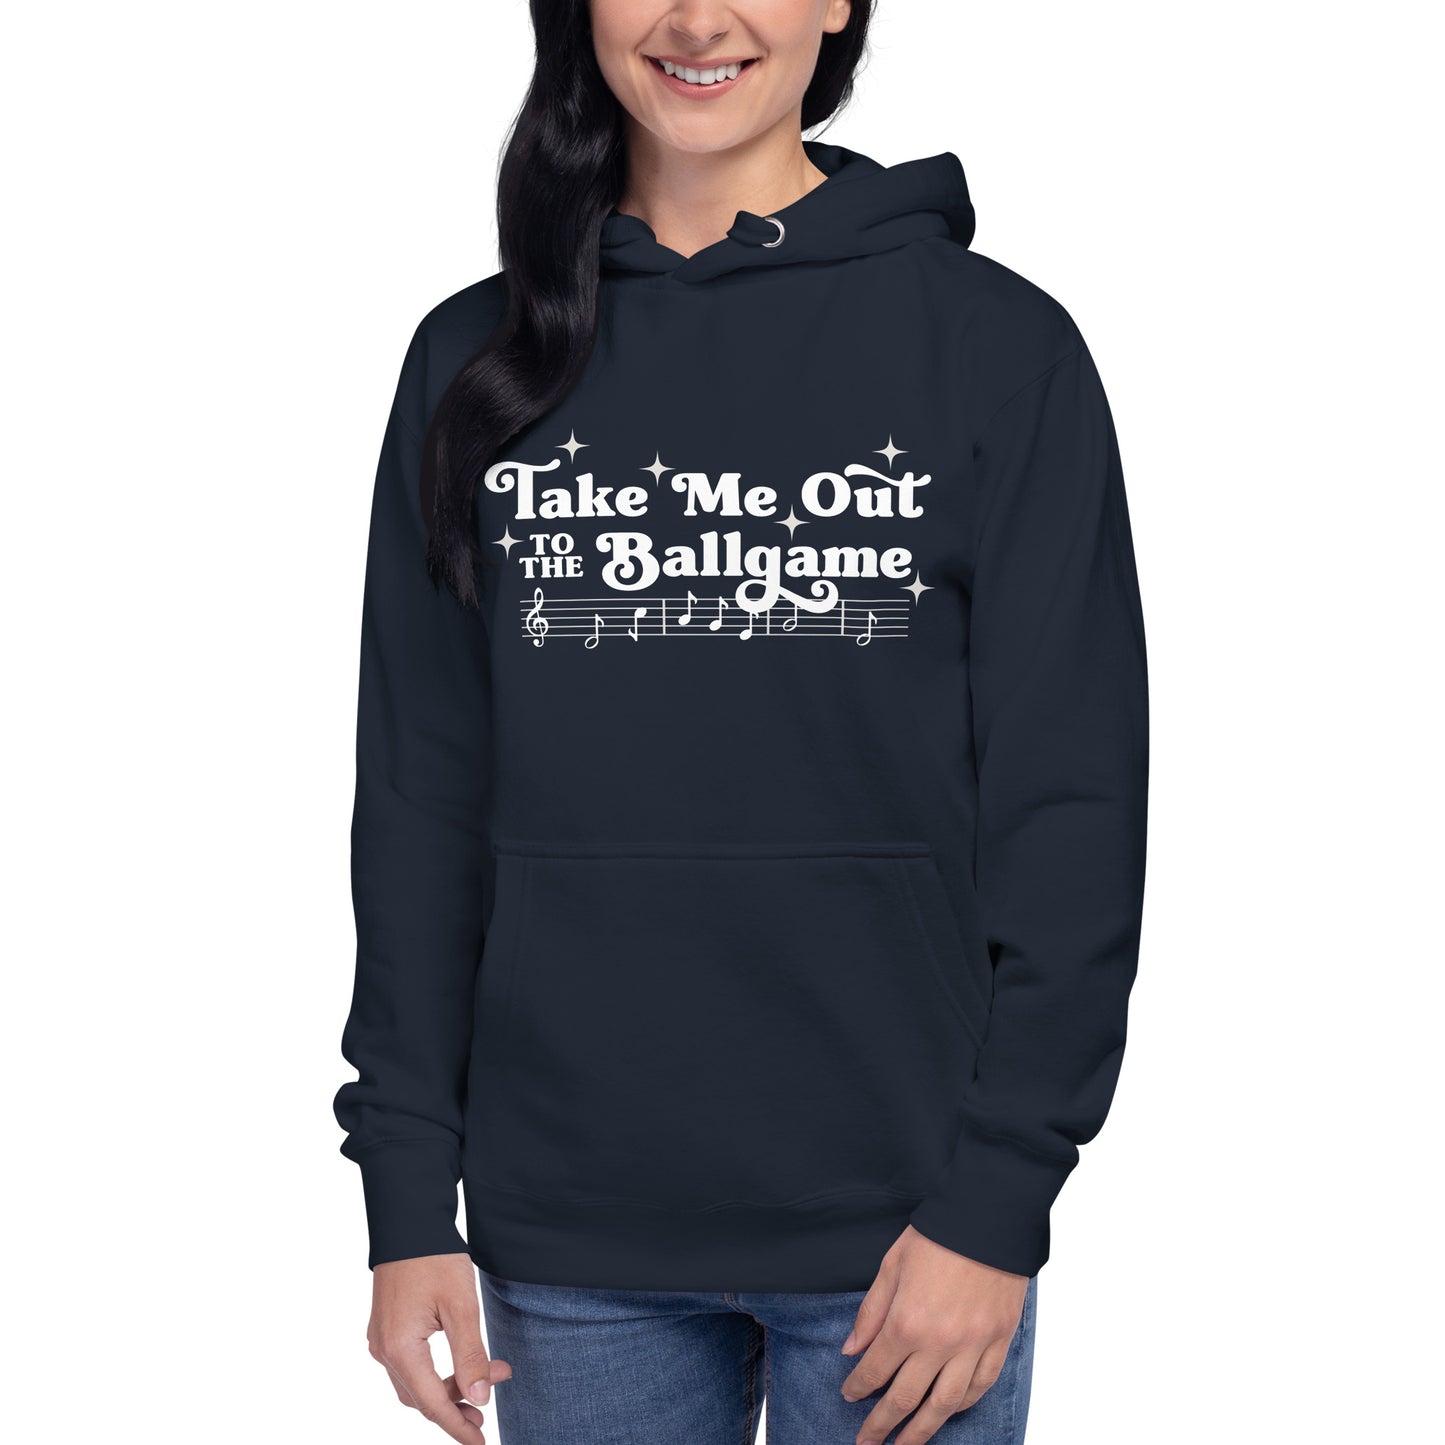 Image of woman wearing navy hoodie with design of "Take Me Out to the Ballgame" with coordinating musical notes in white located on centre chest. This design is exclusive to Tailgate Mercantile and available only online.